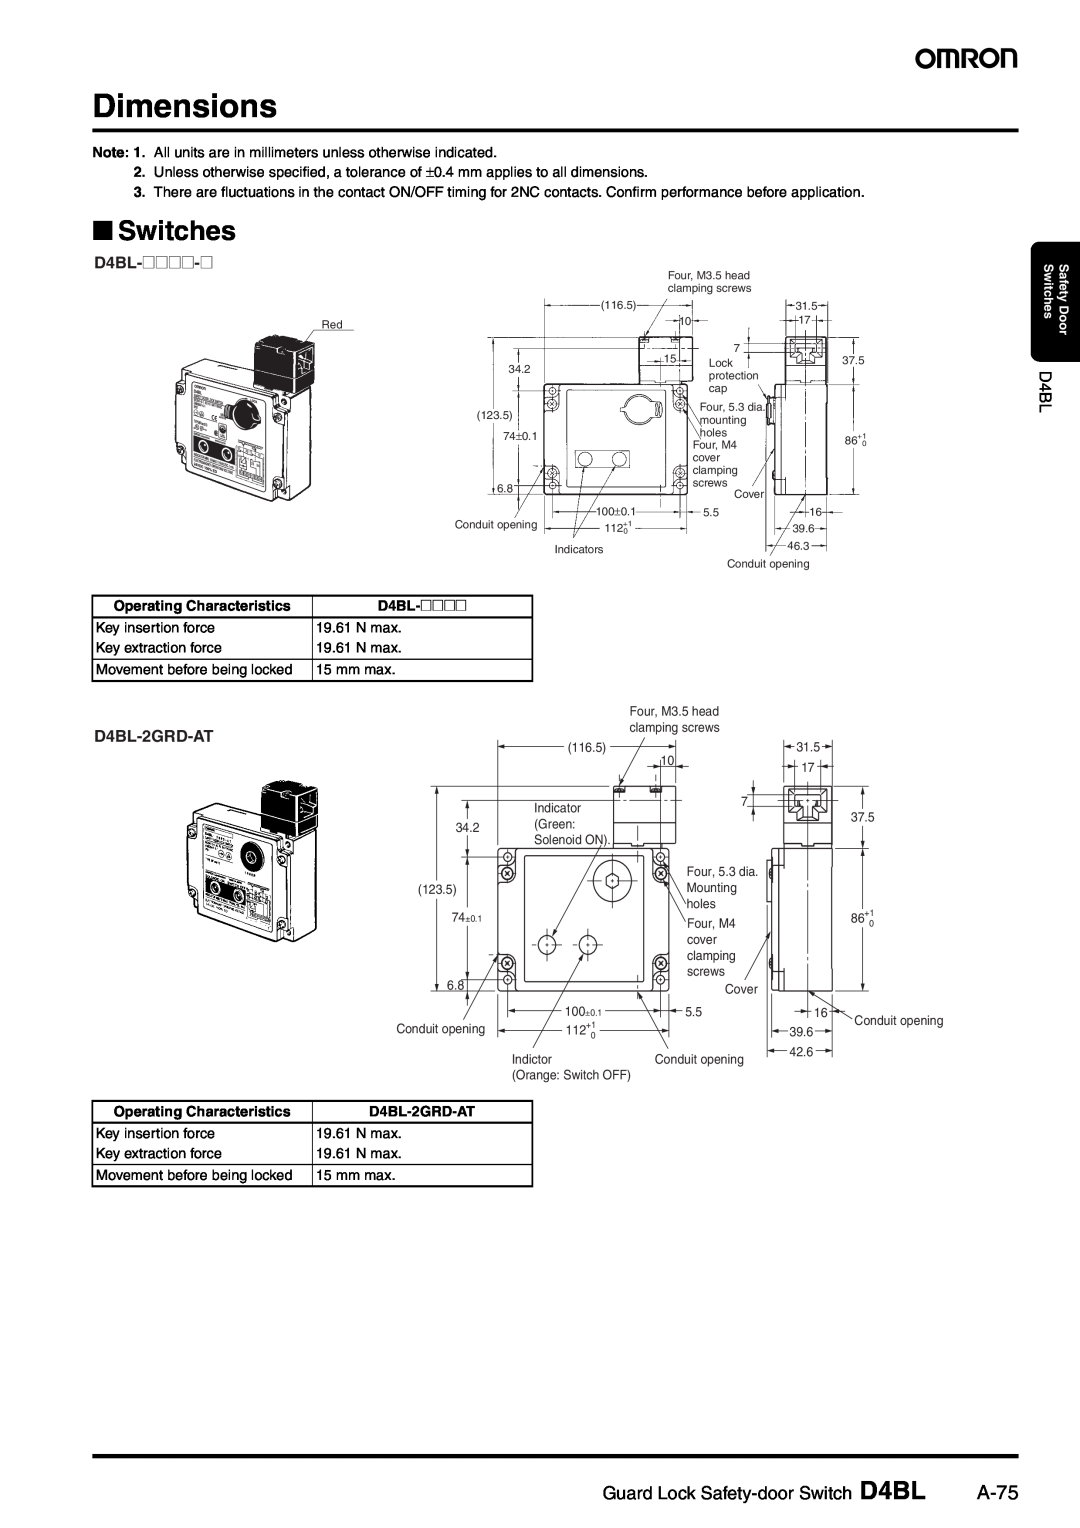 Omron manual Dimensions, Switches, A-75, D4BL-@@@@-@, D4BL-2GRD-AT, Guard Lock Safety-door Switch D4BL 